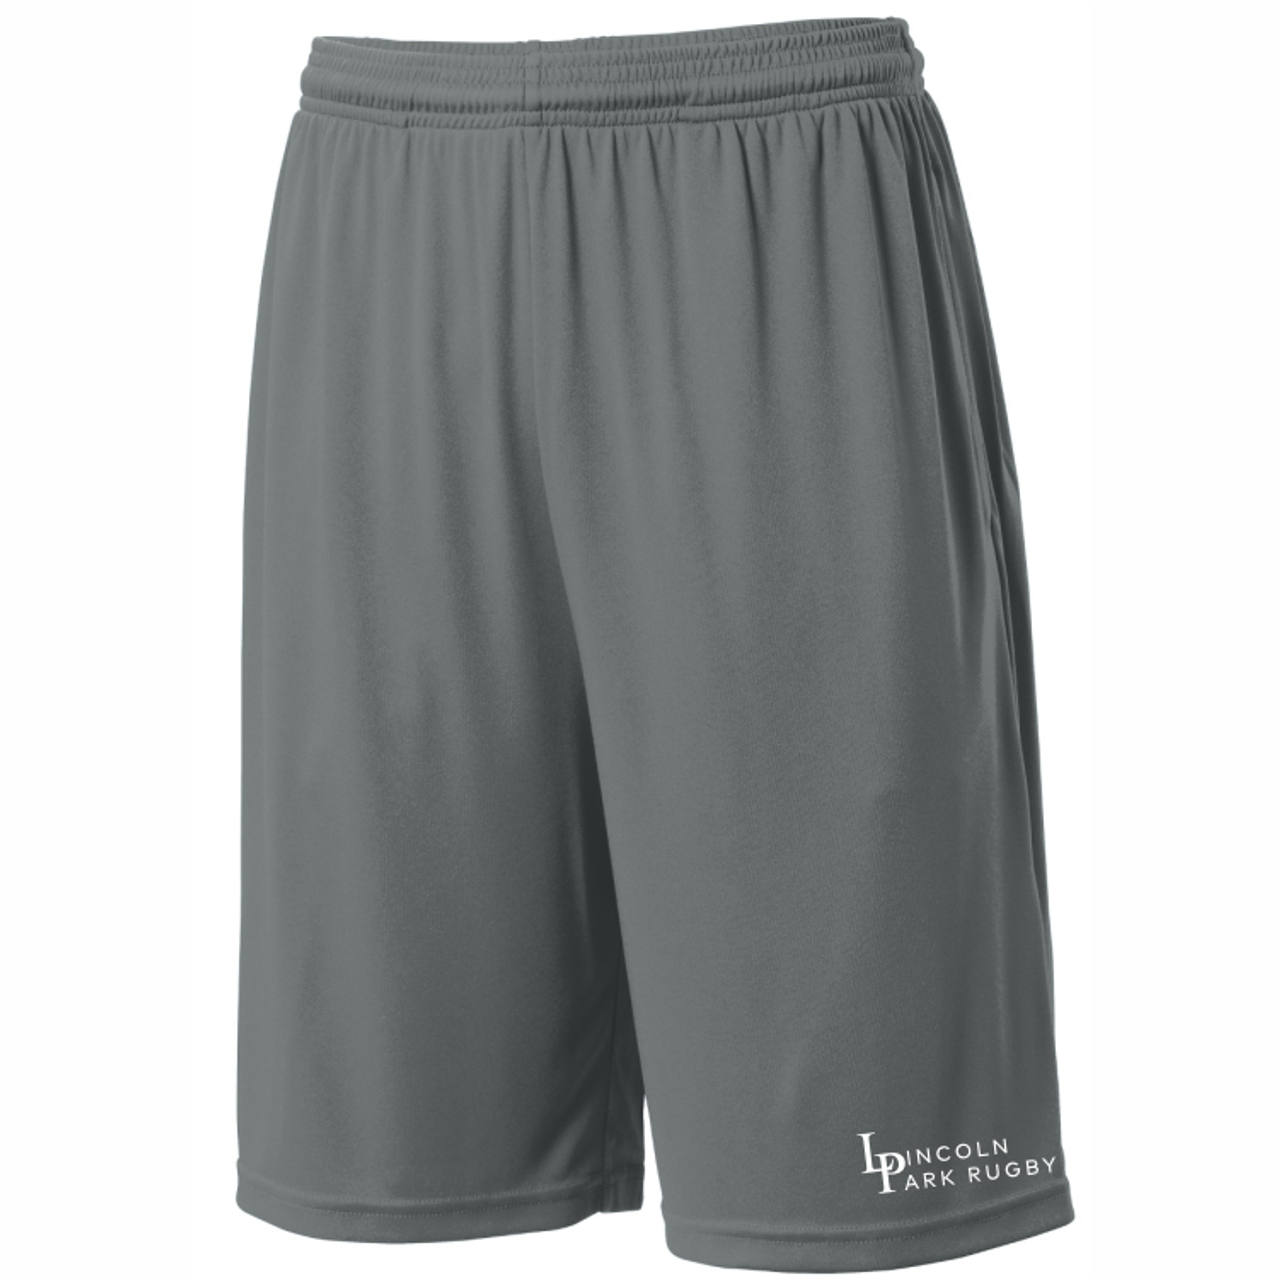 Lincoln Park RFC Athletic Shorts, Gray 9" Inseam